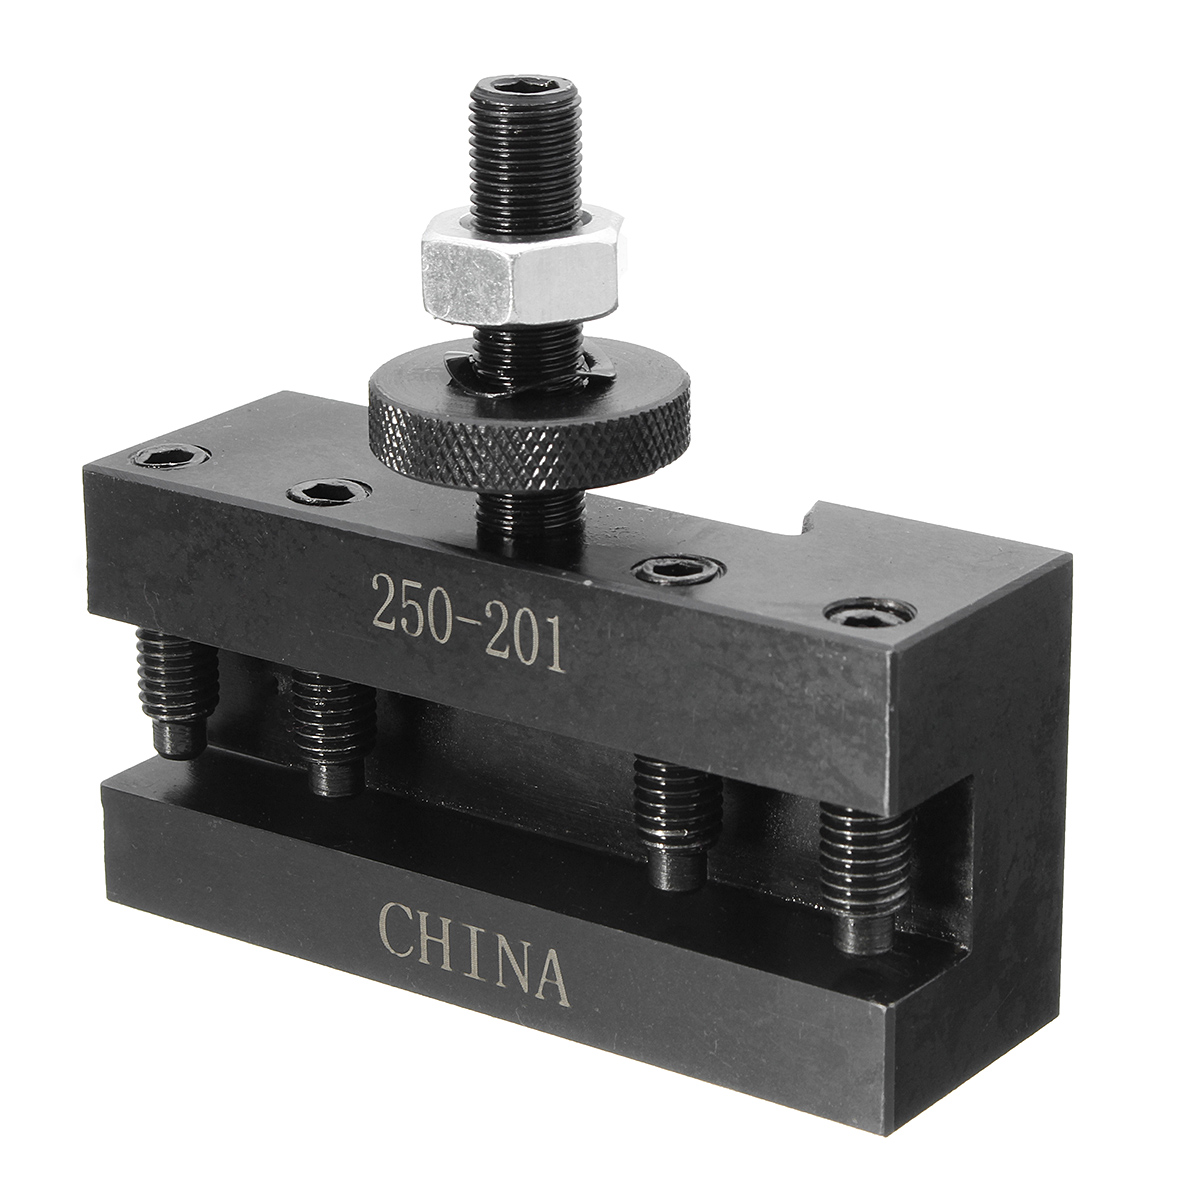 Machifit-250-201-202-204-207-210-Quick-Change-Tool-Holder-Turning-and-Facing-Holder-for-Lathe-Tools-1728342-1